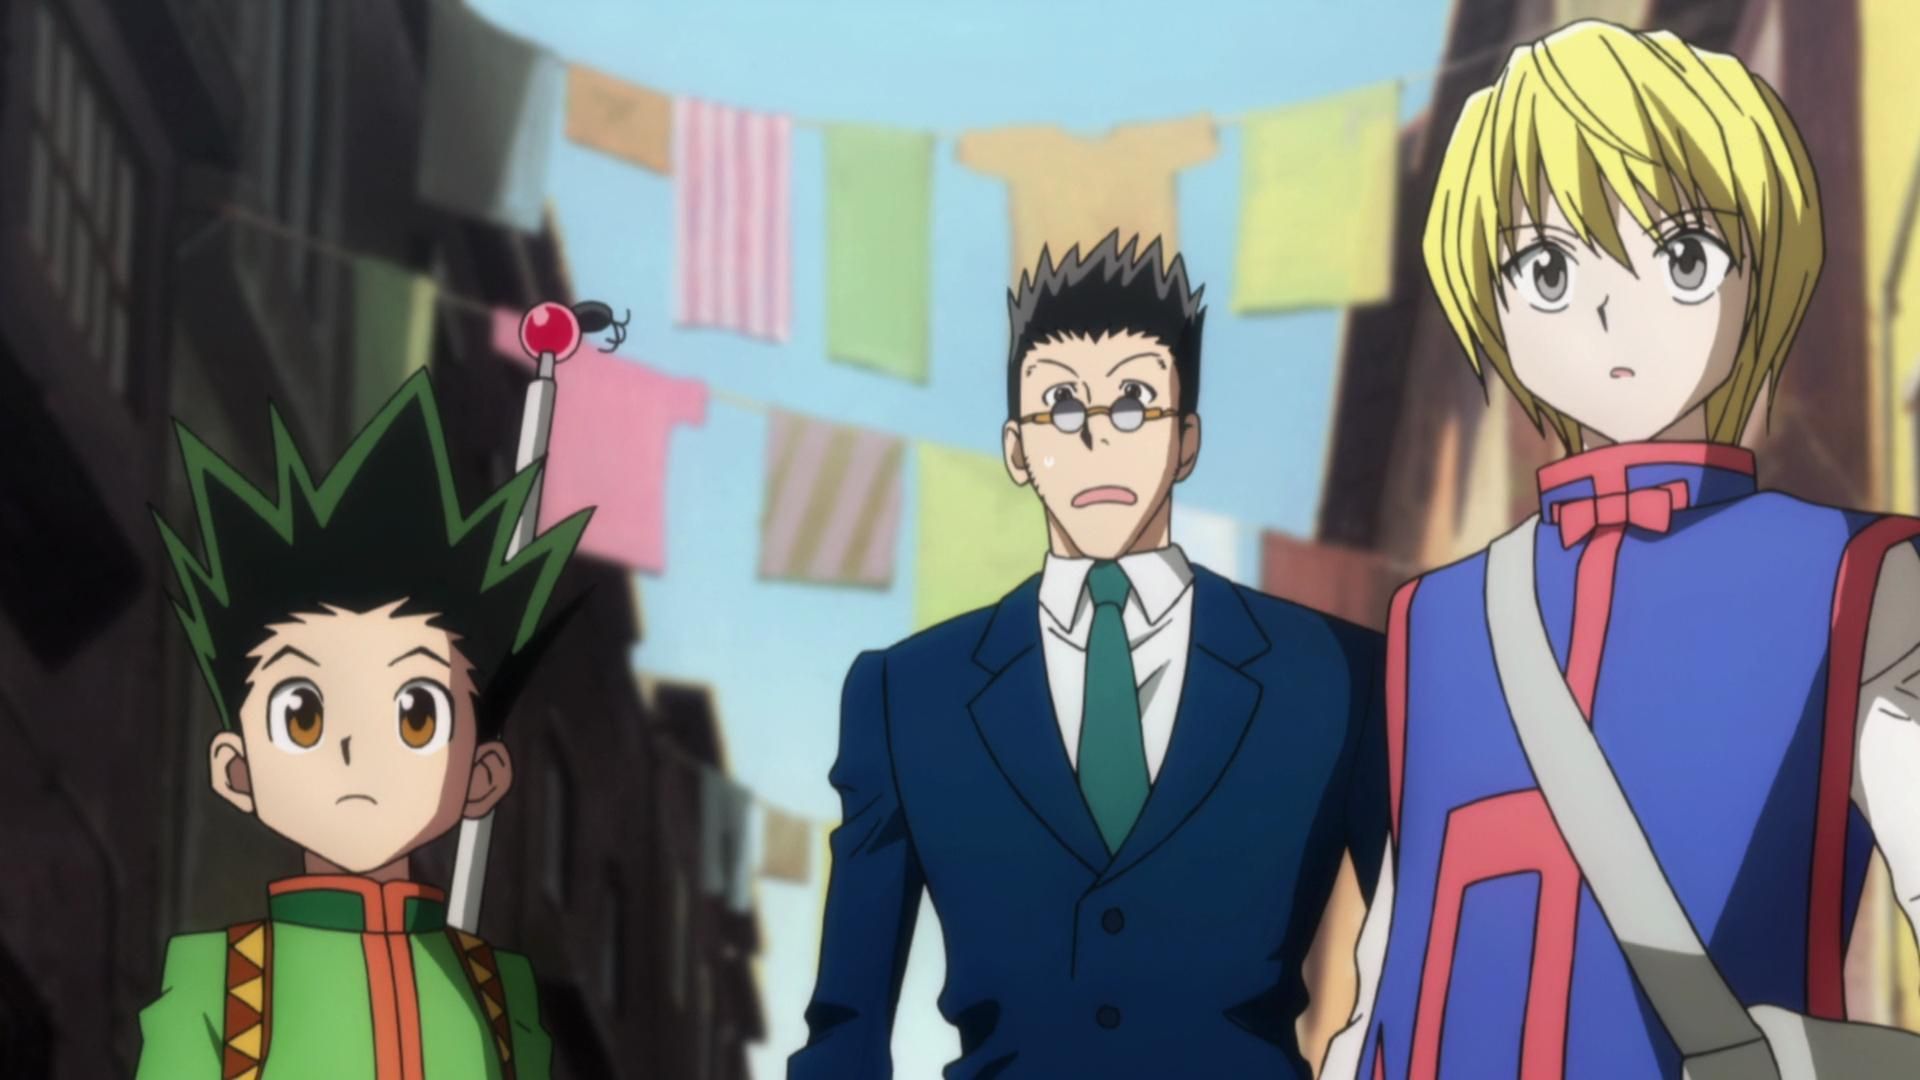 10 Anime Like Hunter X Hunter You Should Watch - Cultured Vultures